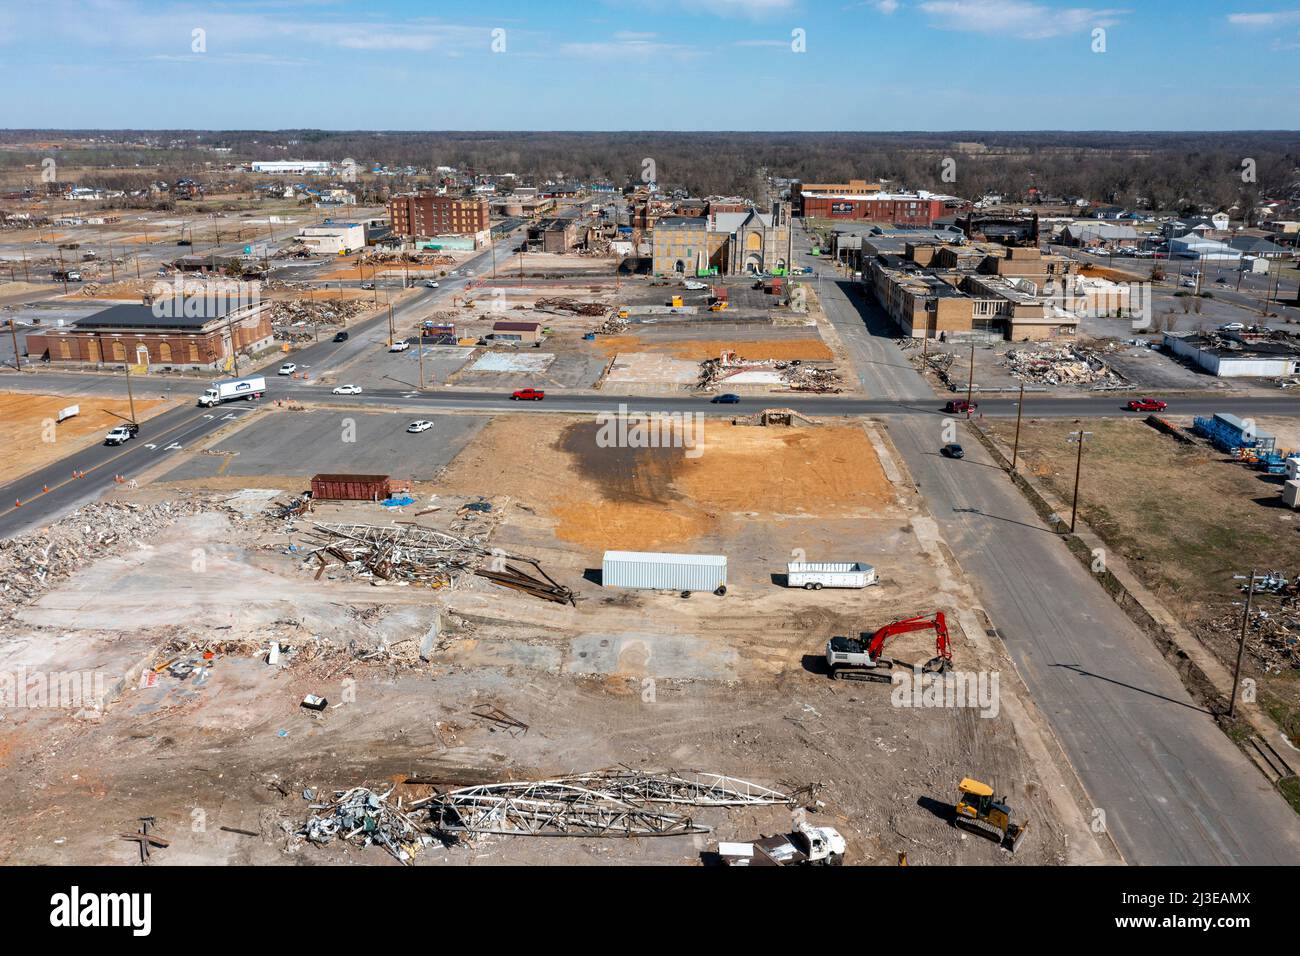 Mayfield, Kentucky - Damage from the December 2021 tornado that devasted towns in western Kentucky. Many buildings were destroyed in the city's downto Stock Photo